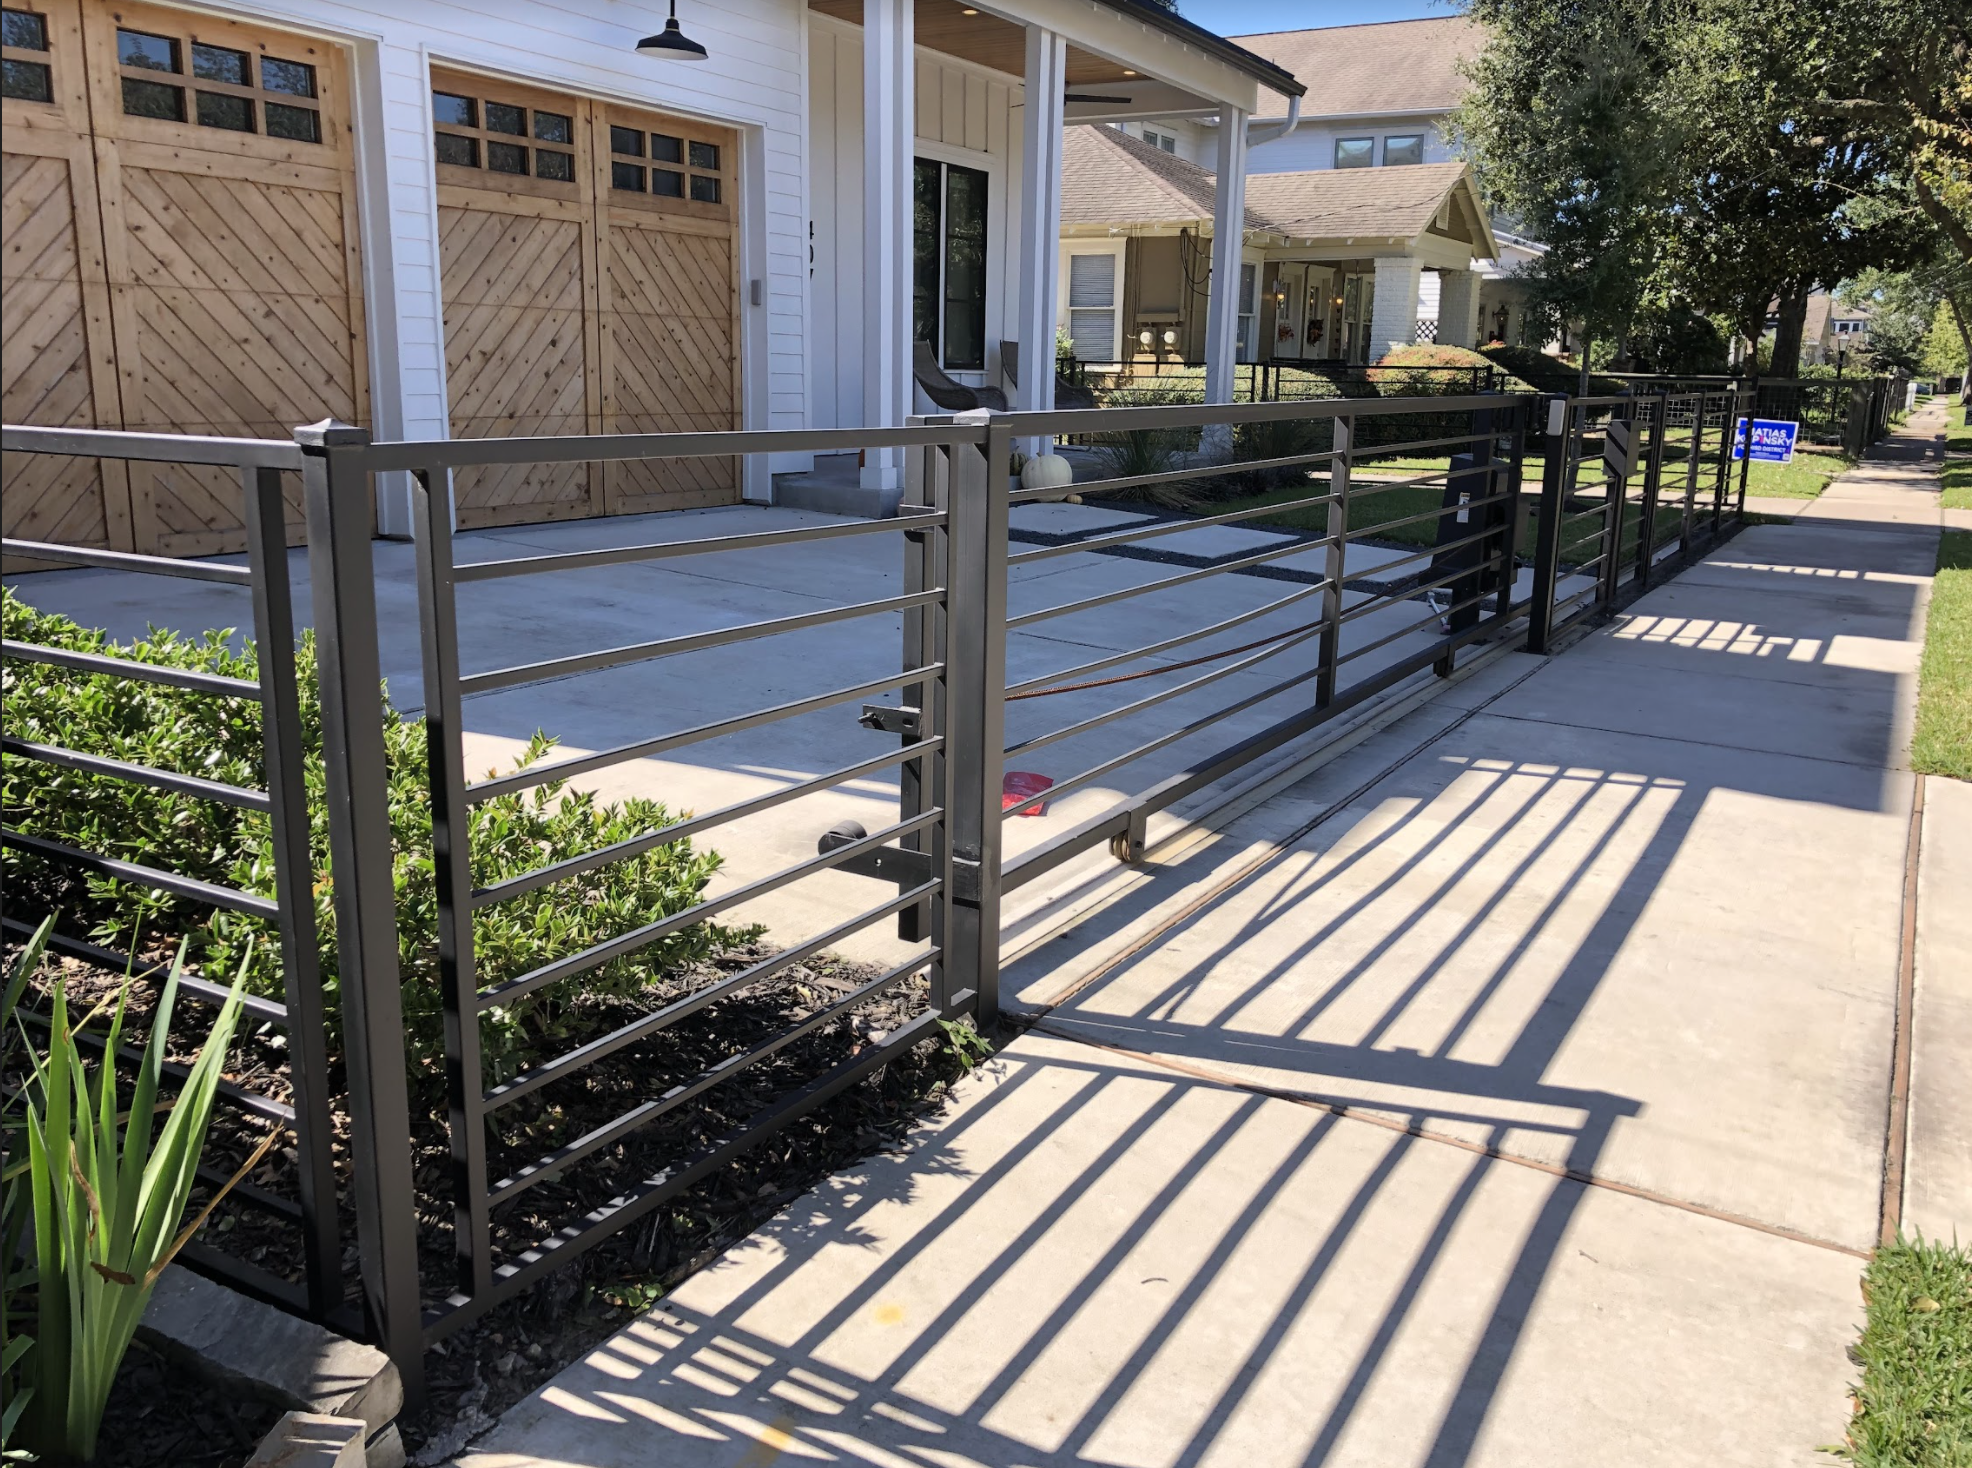 Yard with concrete walkway and hog wire fence surrounding the house